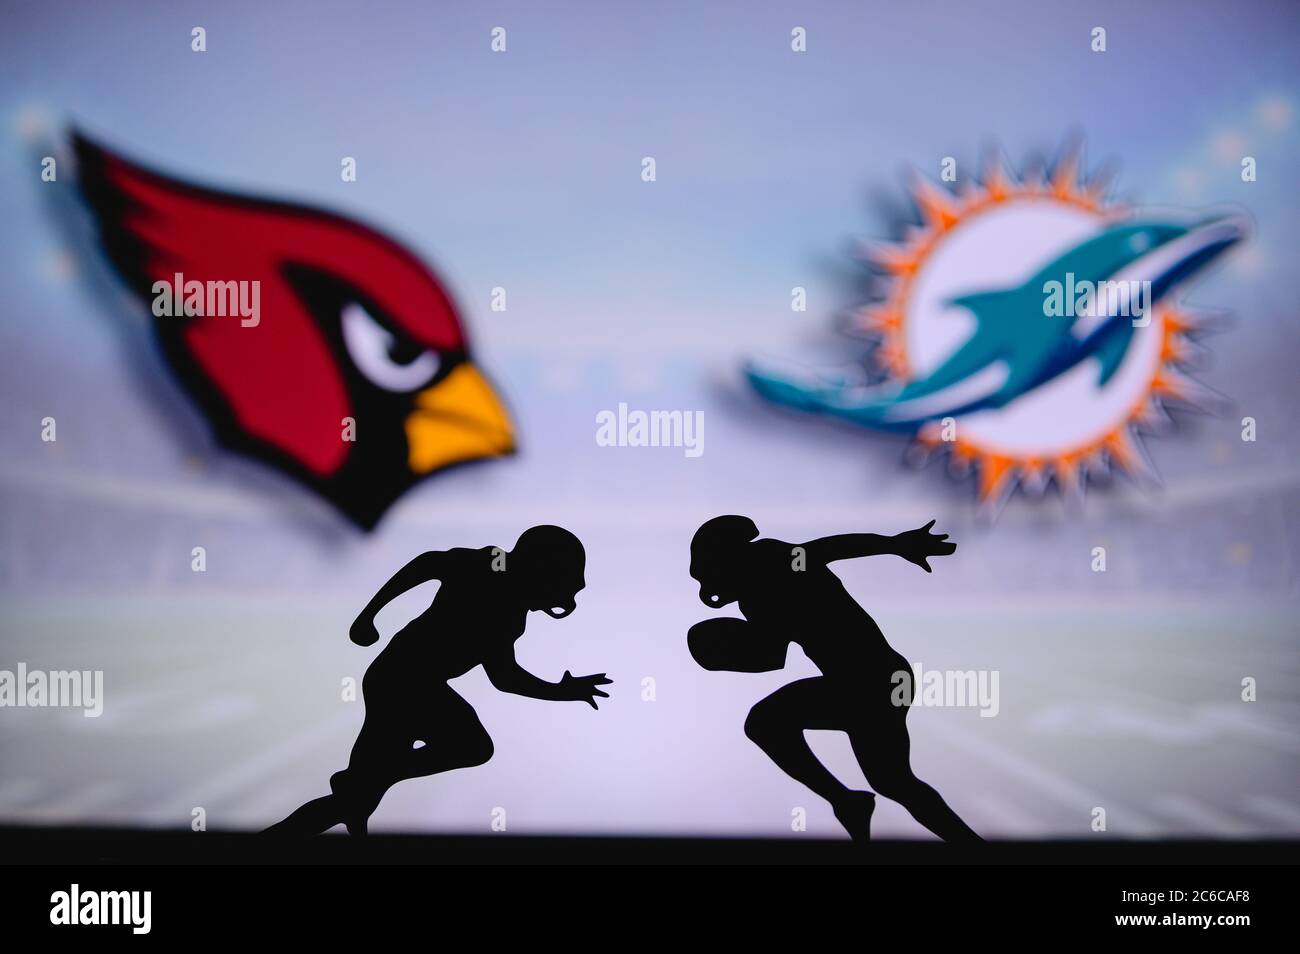 Arizona Cardinals vs. Miami Dolphins. NFL match poster. Two american football players silhouette facing each other on the field. Clubs logo in backgro Stock Photo